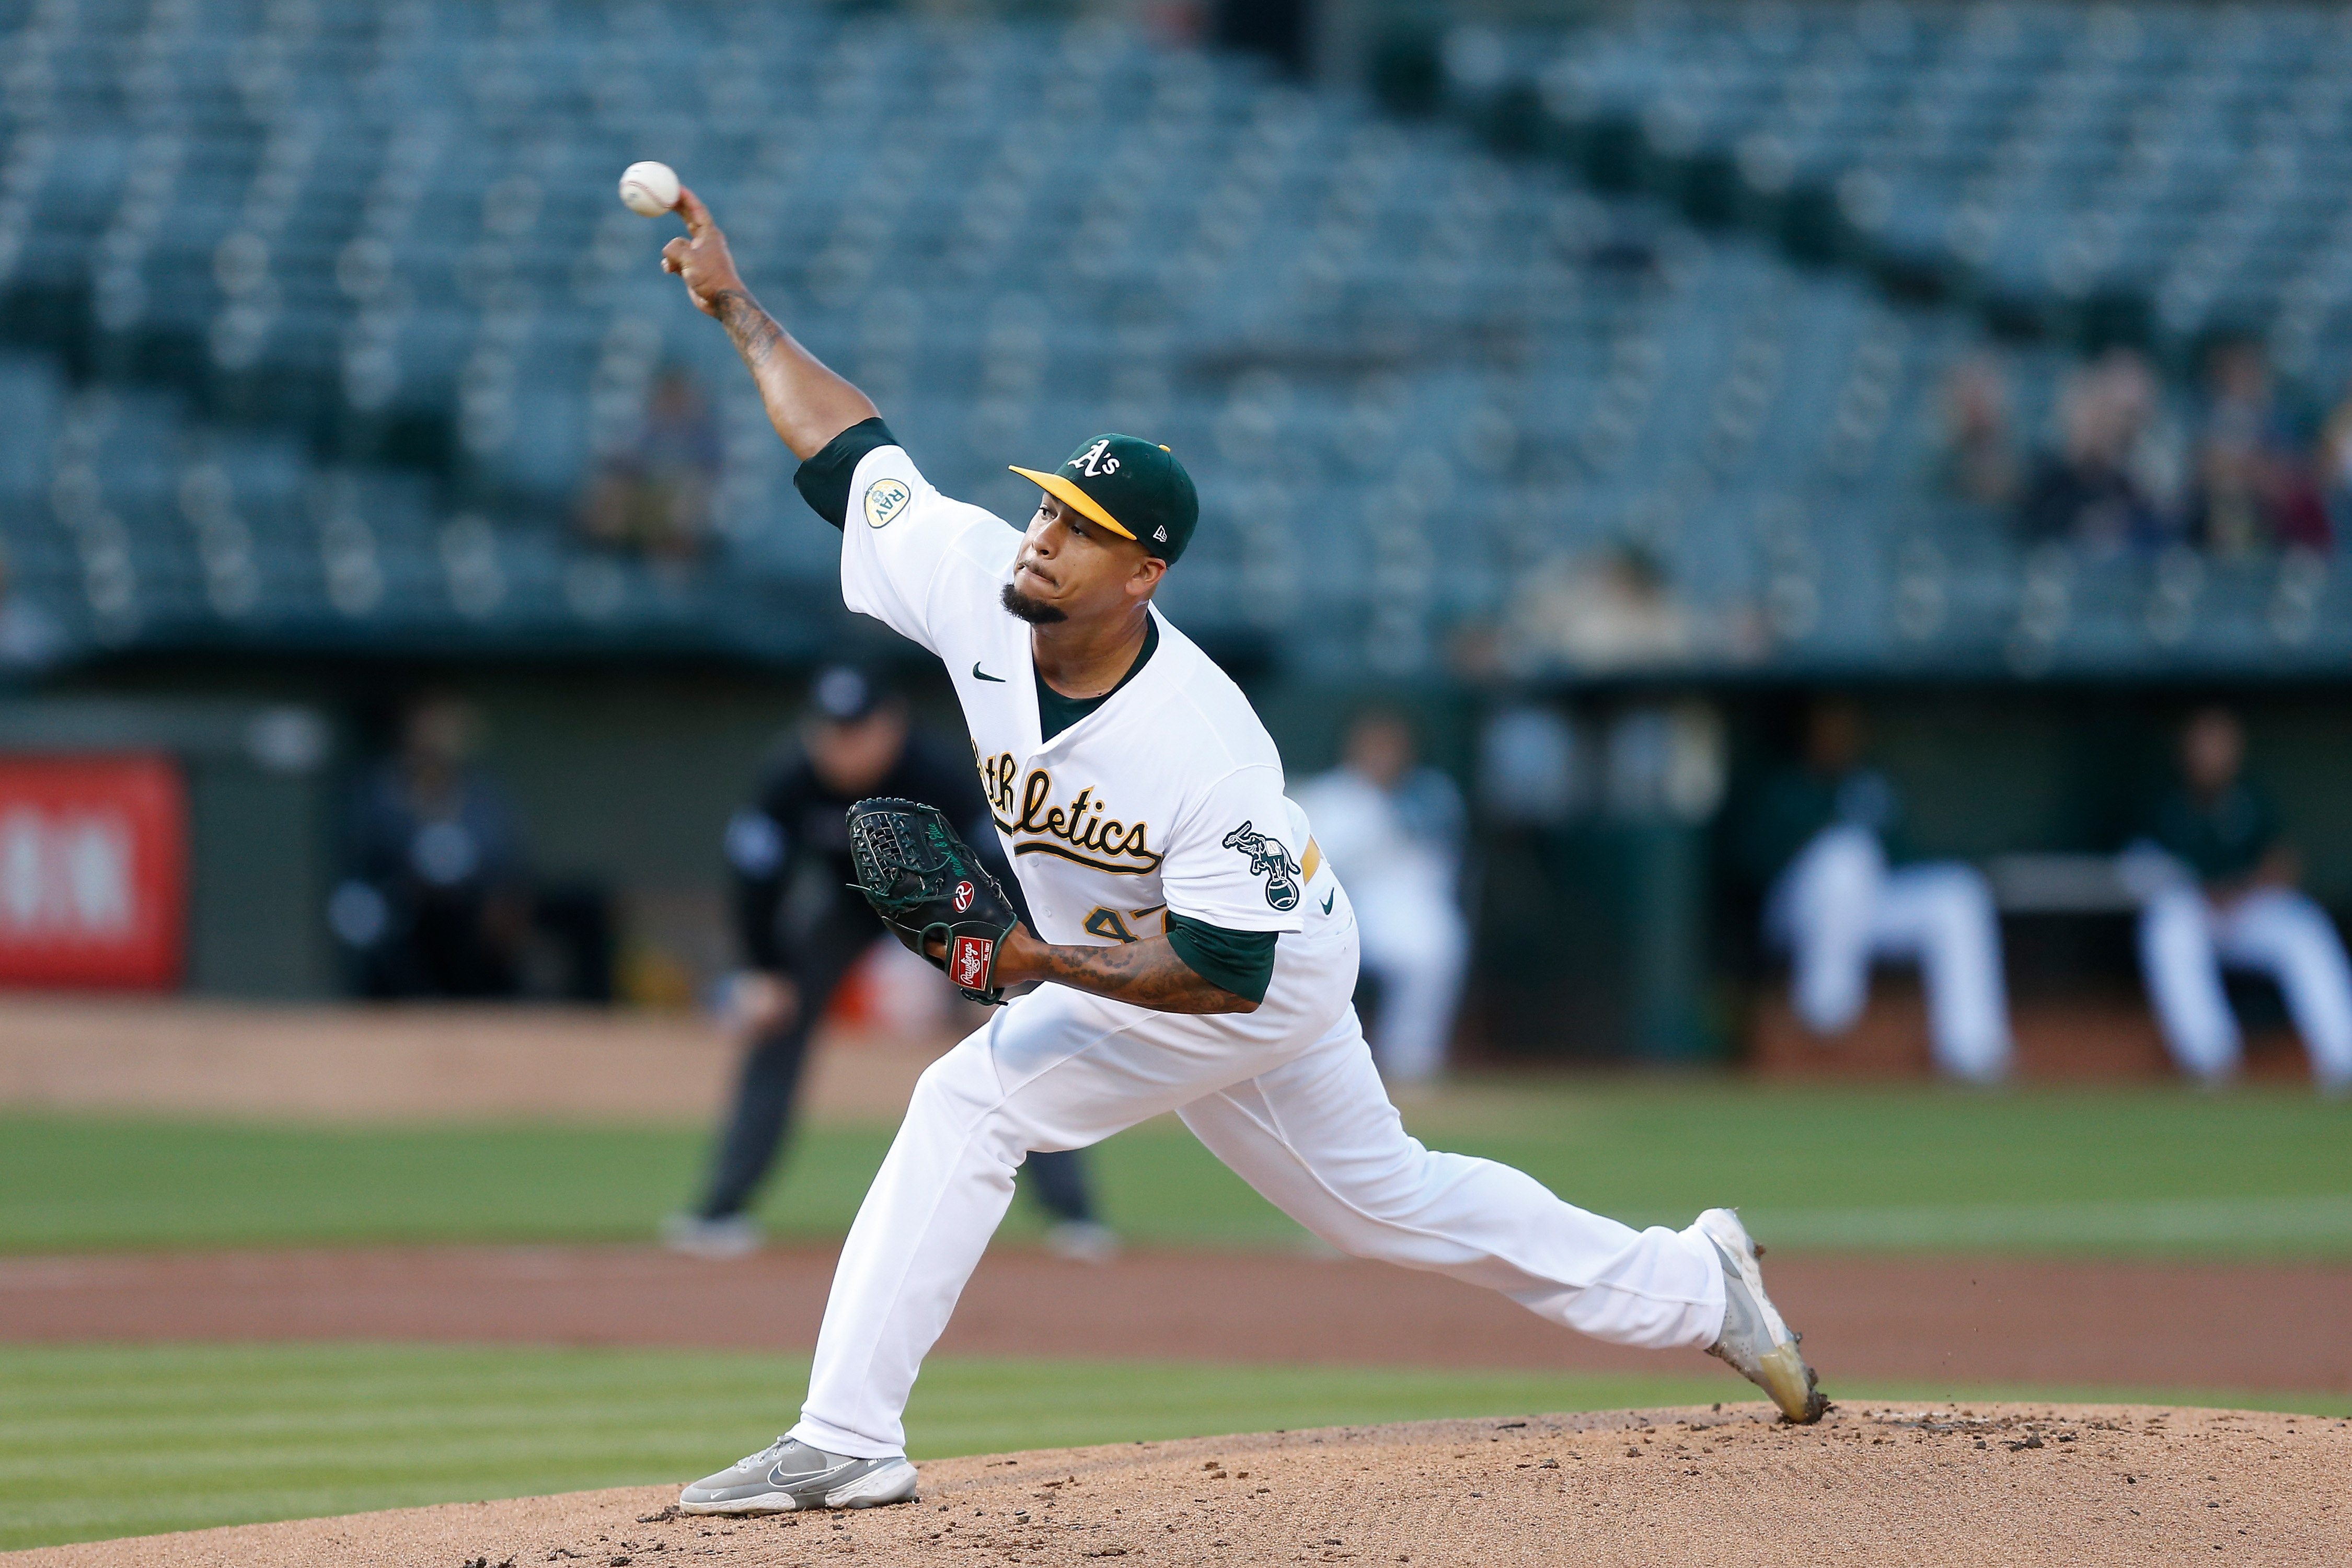 Frankie Montas #47 of the Oakland Athletics pitches in the top of the first inning against the Houston Astros at RingCentral Coliseum on July 26, 2022 in Oakland, California.